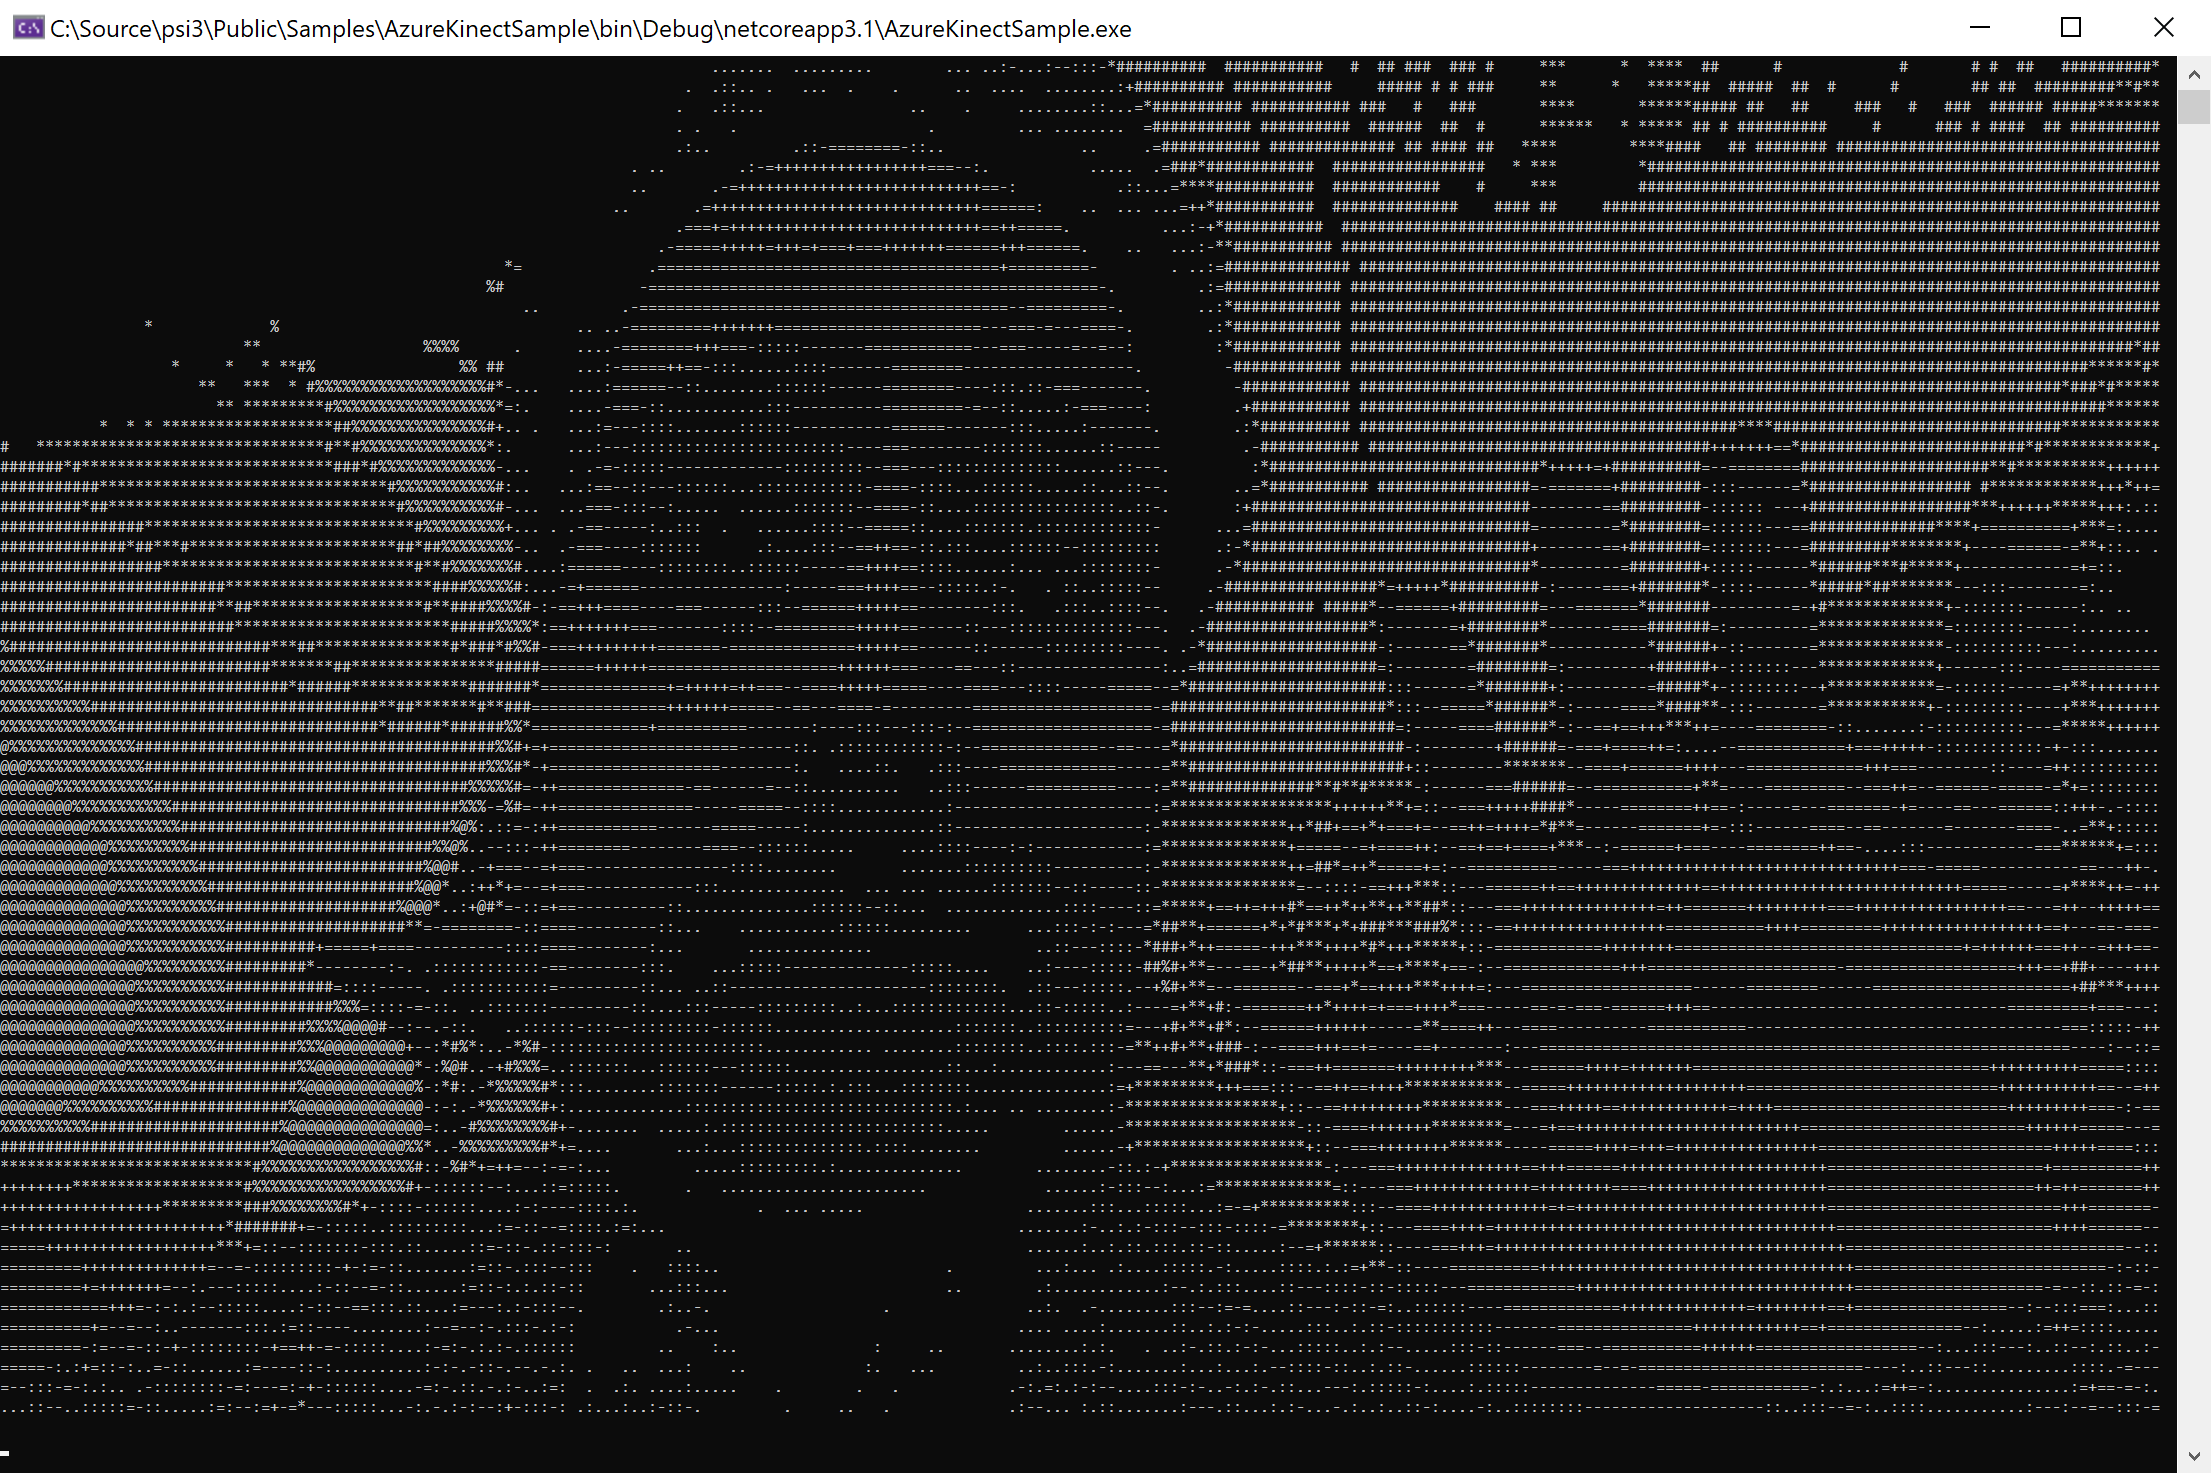 Sample output from Azure Kinect sample showing ASCII art of a person waving